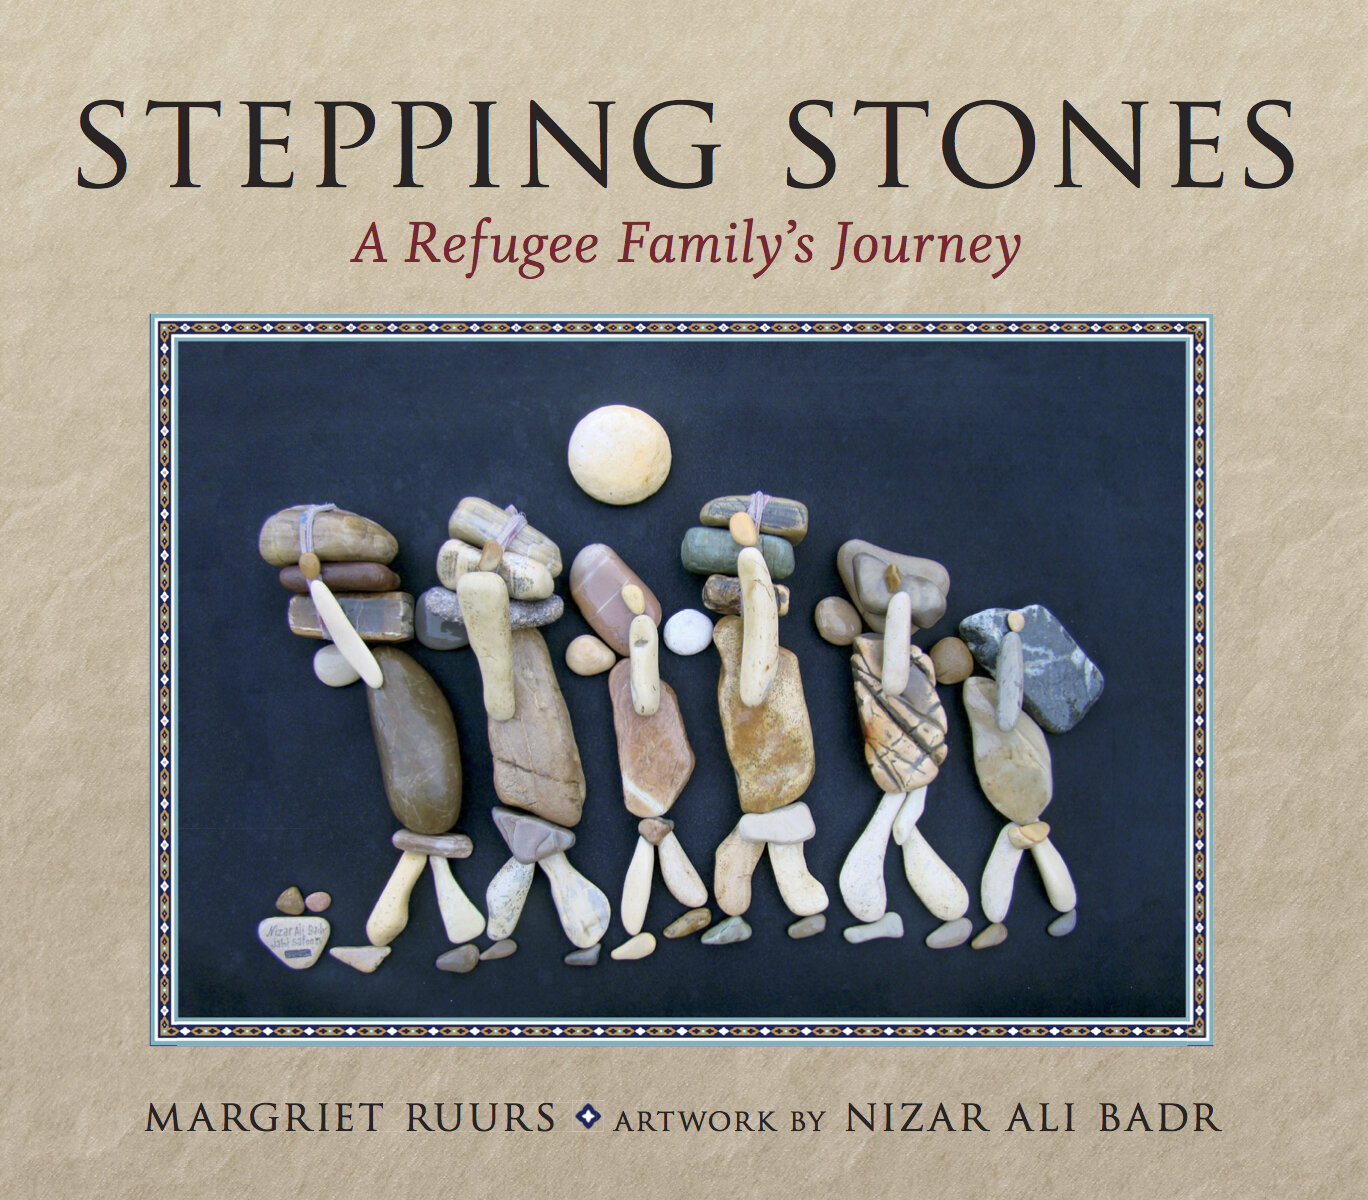 Stepping Stones front cover.jpg